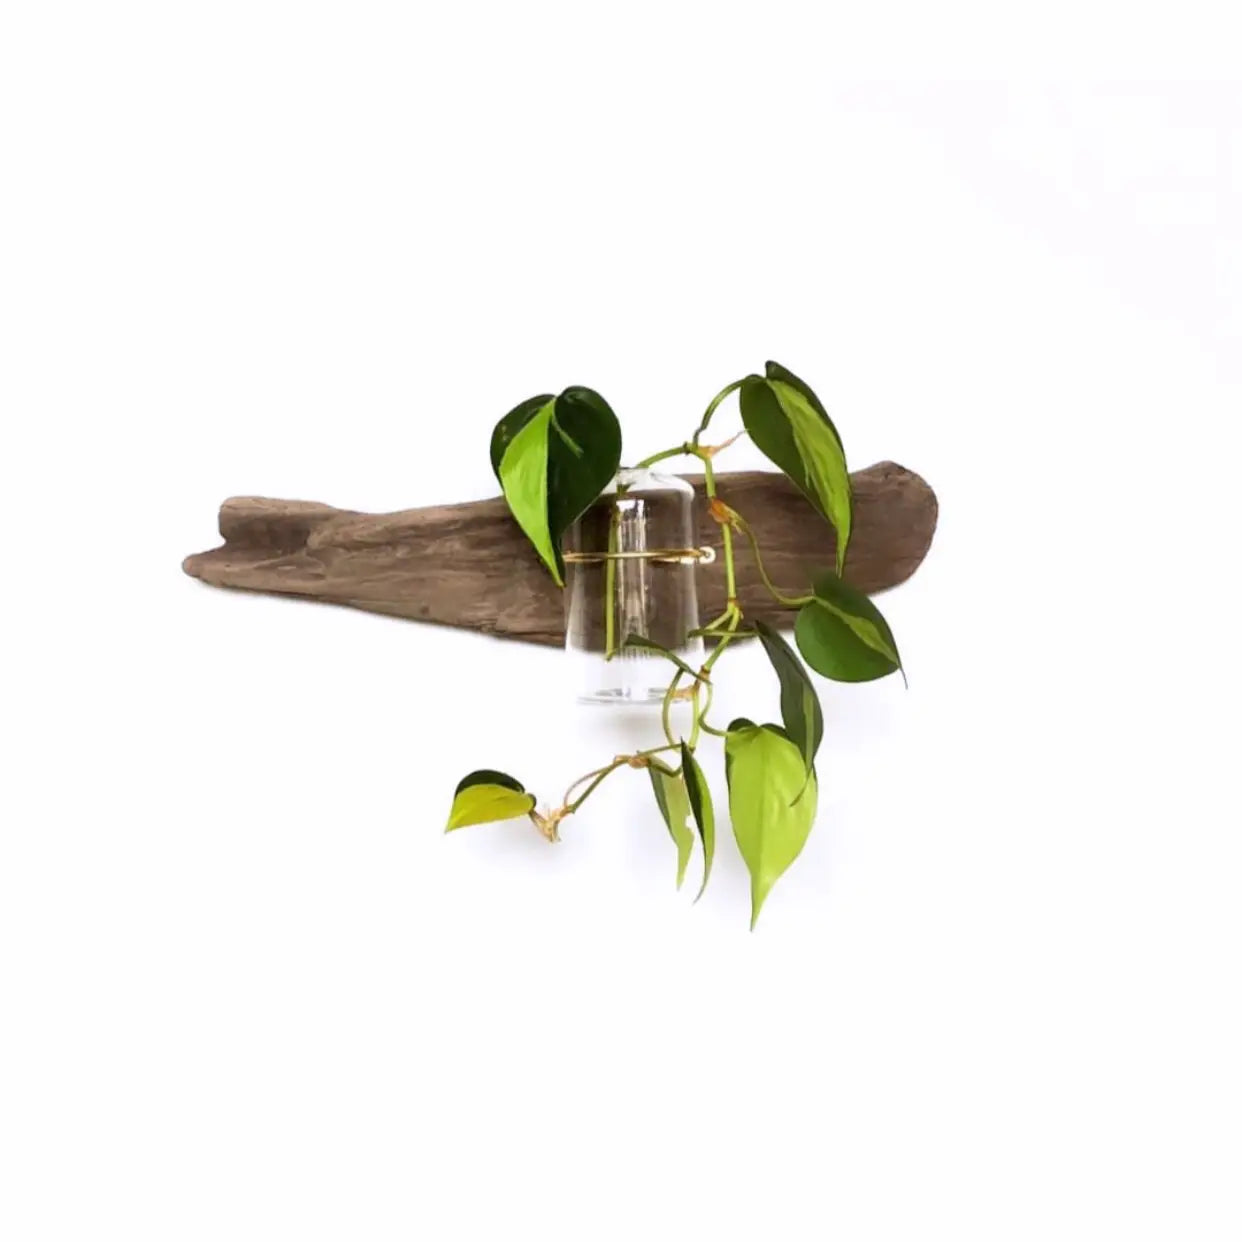 Floral Driftwood Propagation Wall Planter